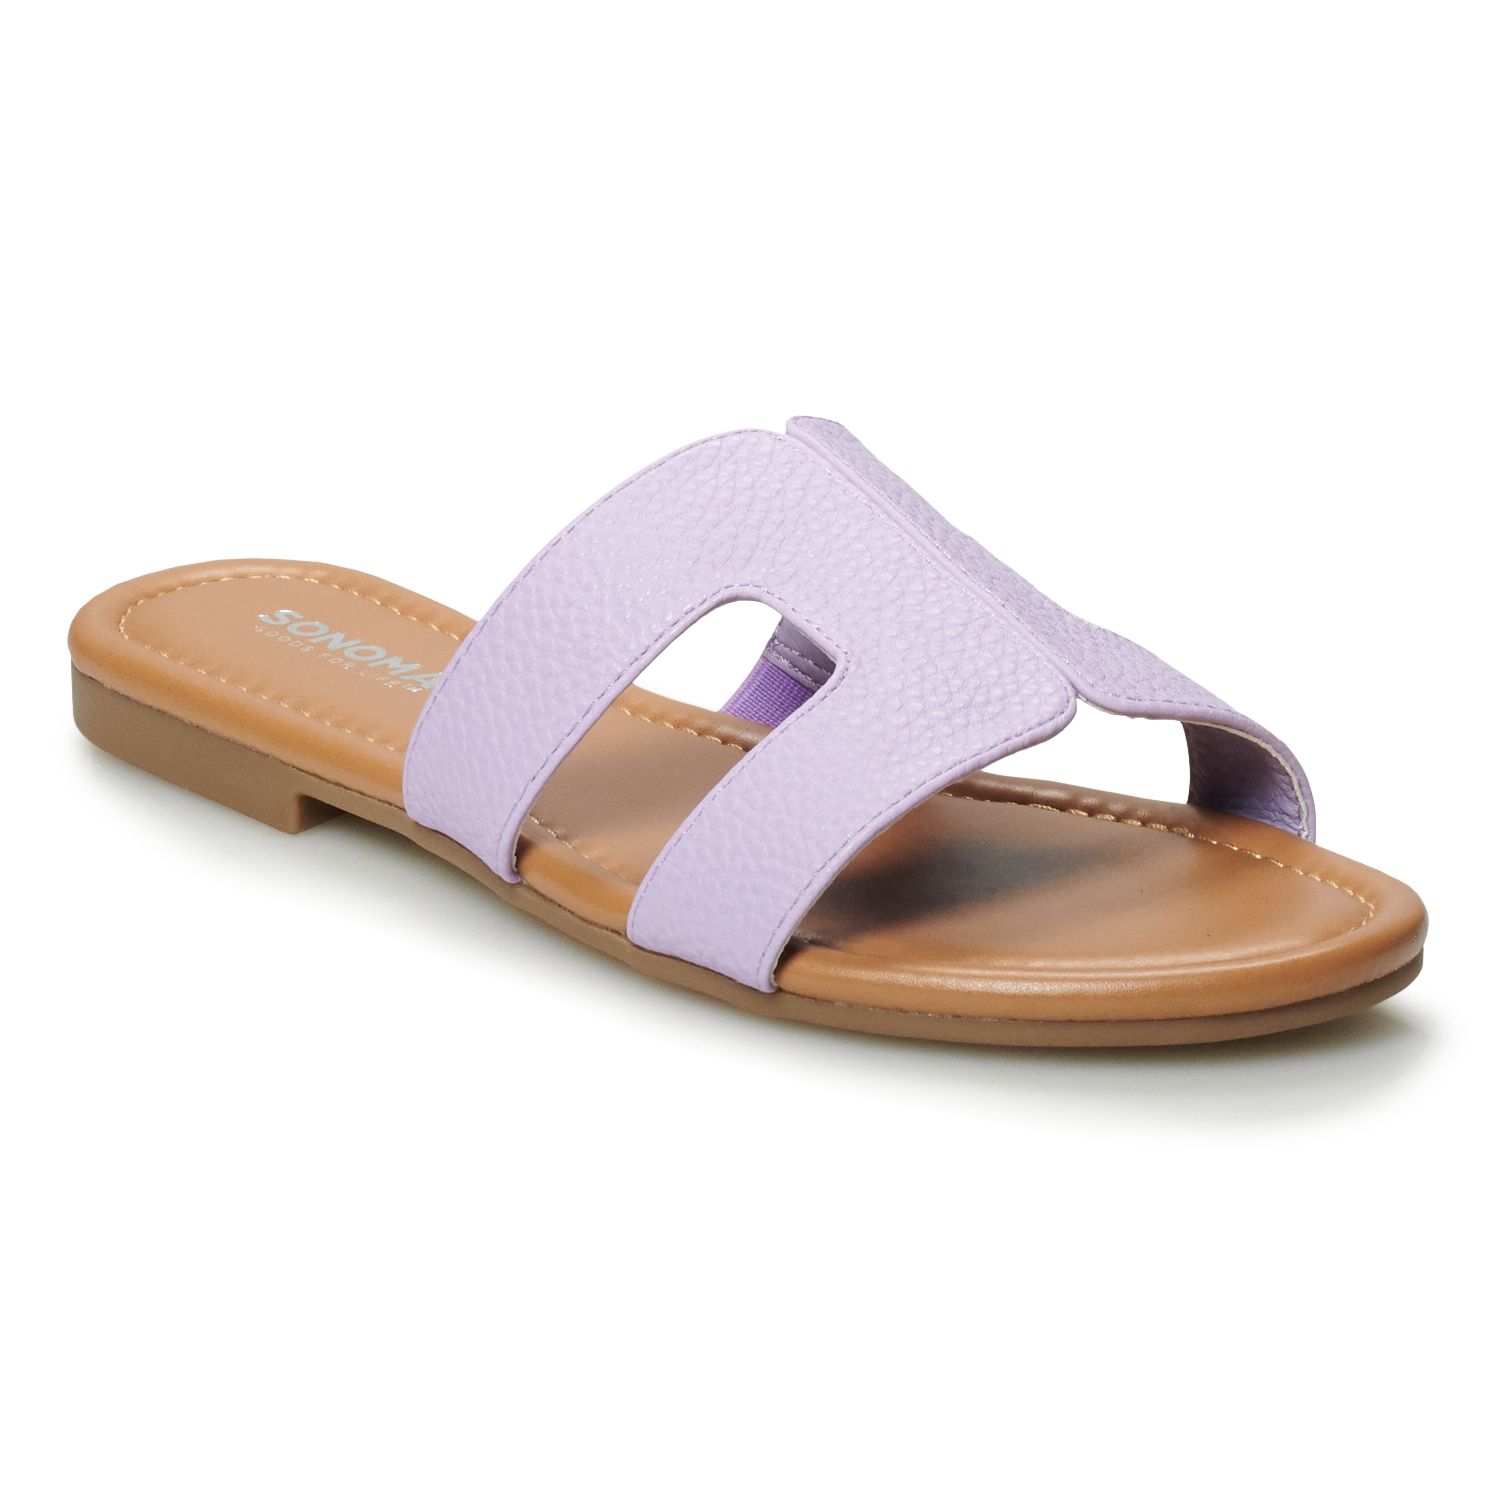 sandals at kohl's department store